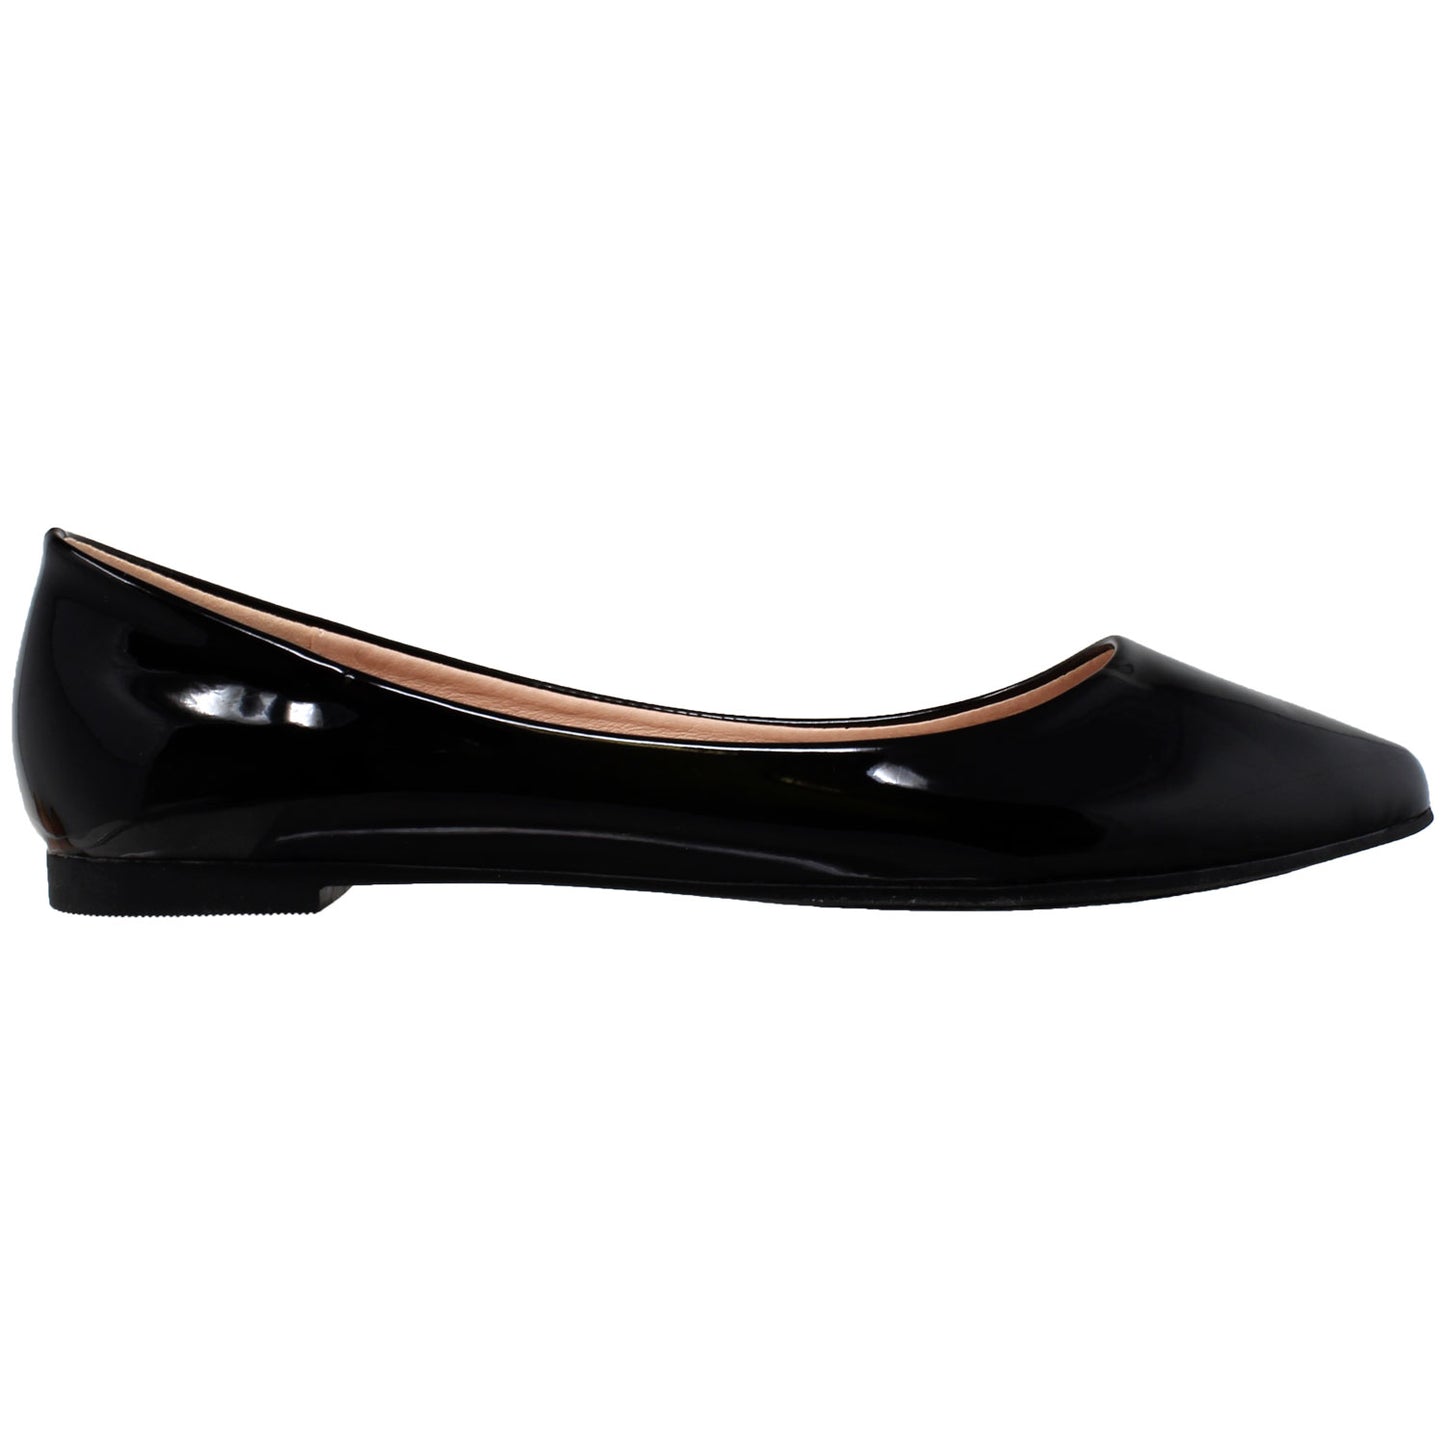 Patent Leather Pointed Toe Ballet Flat